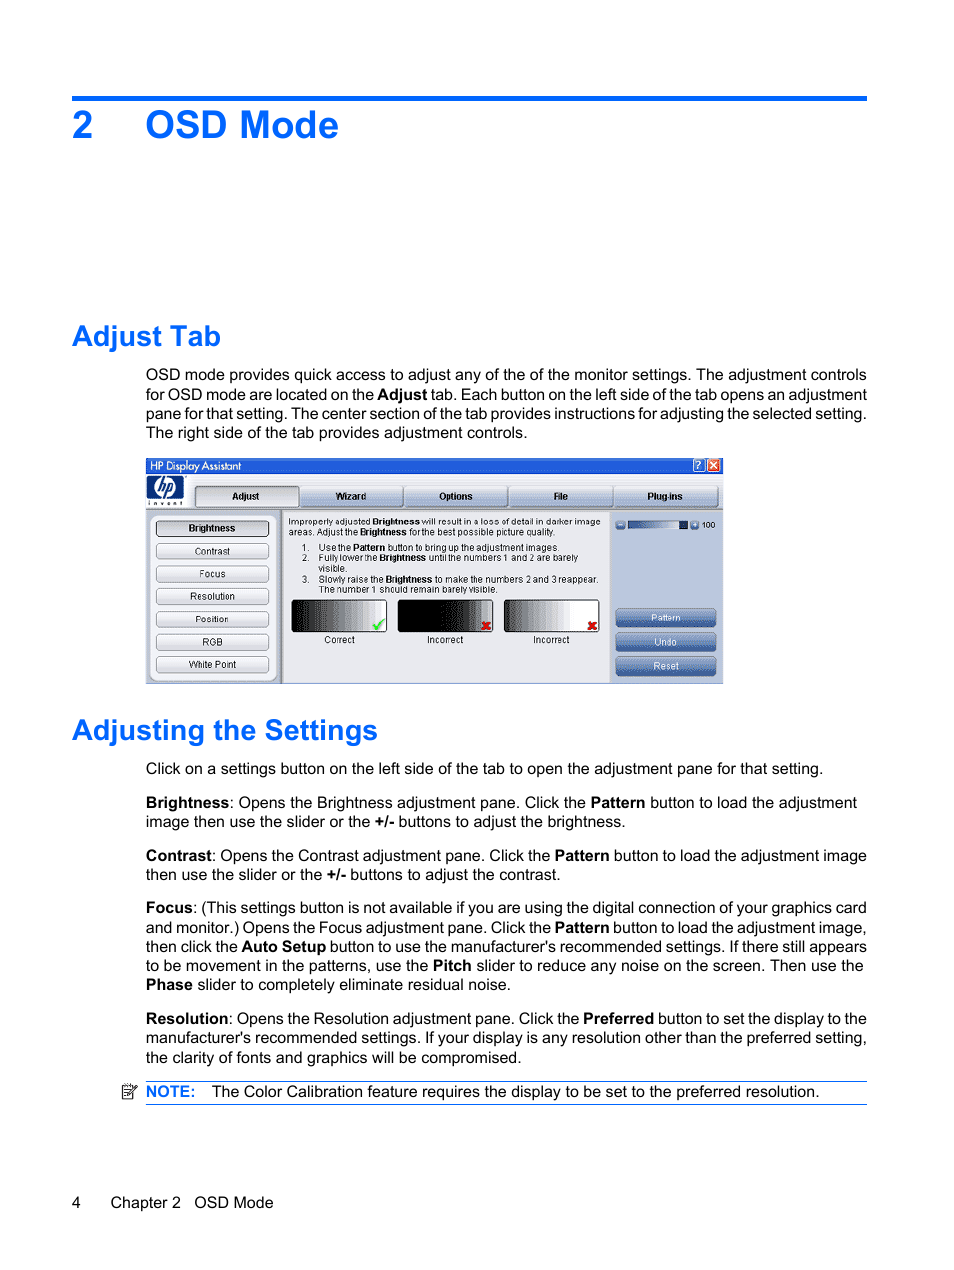 Osd mode, Adjust tab, Adjusting the settings | HP L2208w 22-inch Widescreen  LCD Monitor User Manual | Page 8 / 24 | Original mode